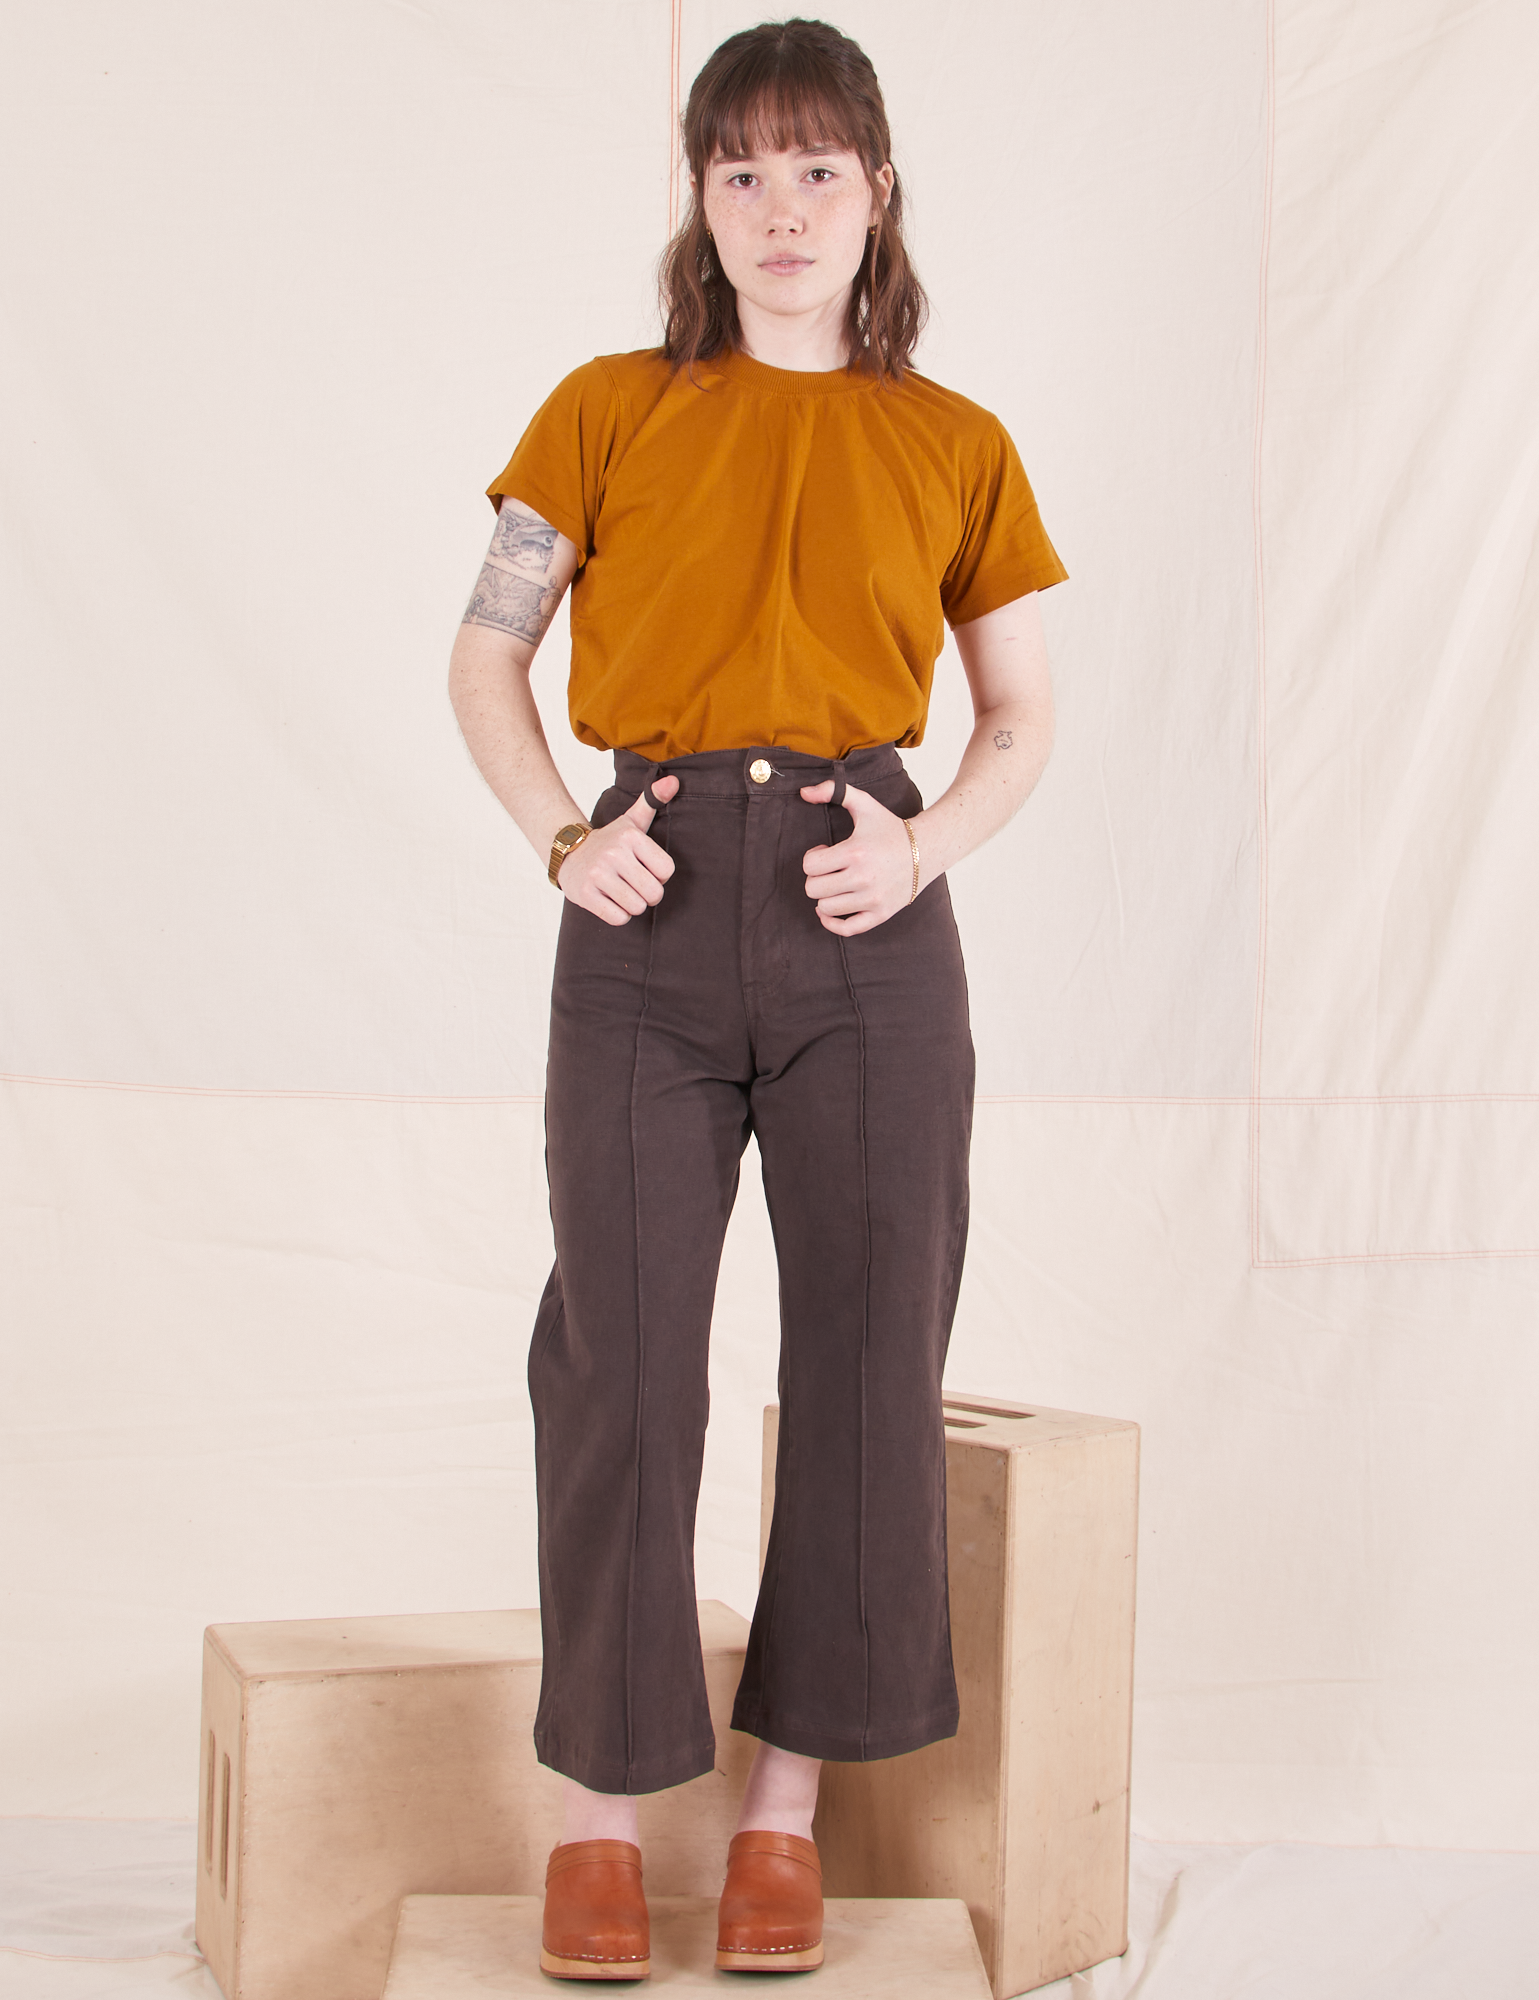 Hana is wearing P Organic Vintage Tee in Spicy Mustard paired with espresso brown Western Pants